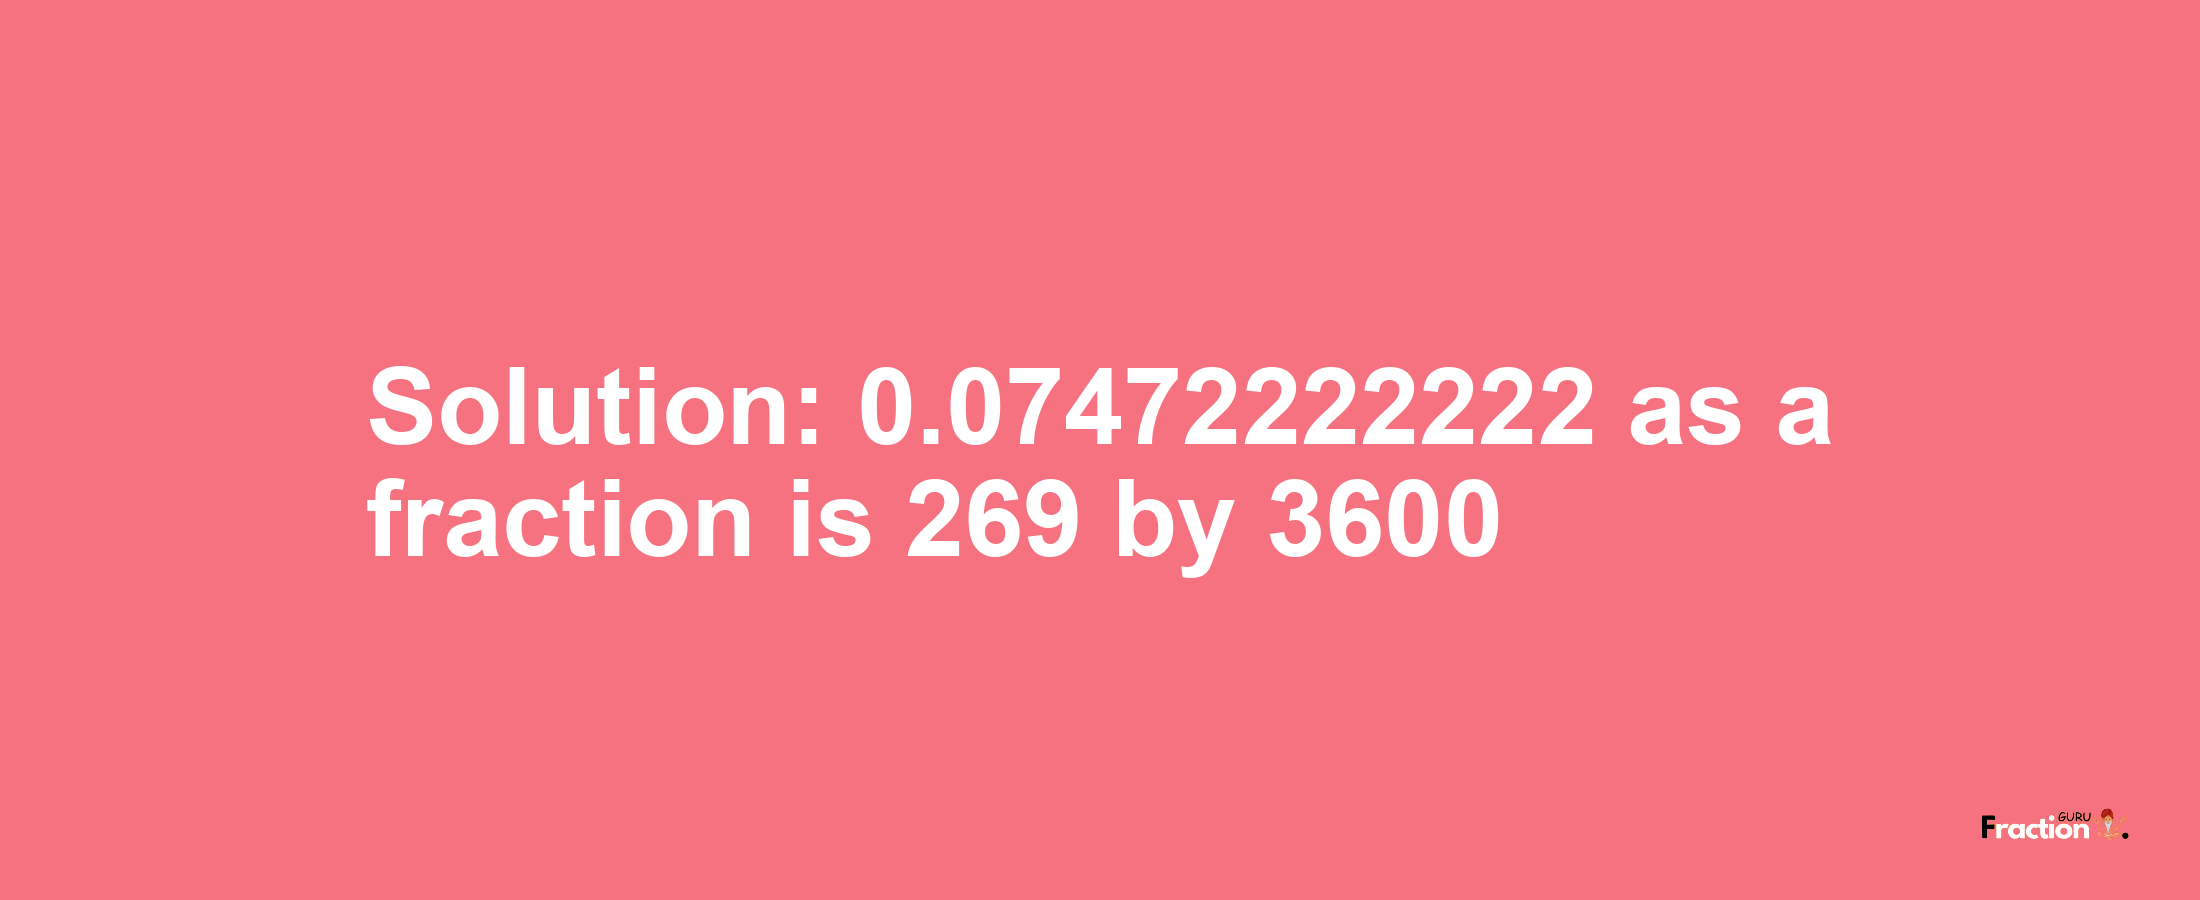 Solution:0.07472222222 as a fraction is 269/3600